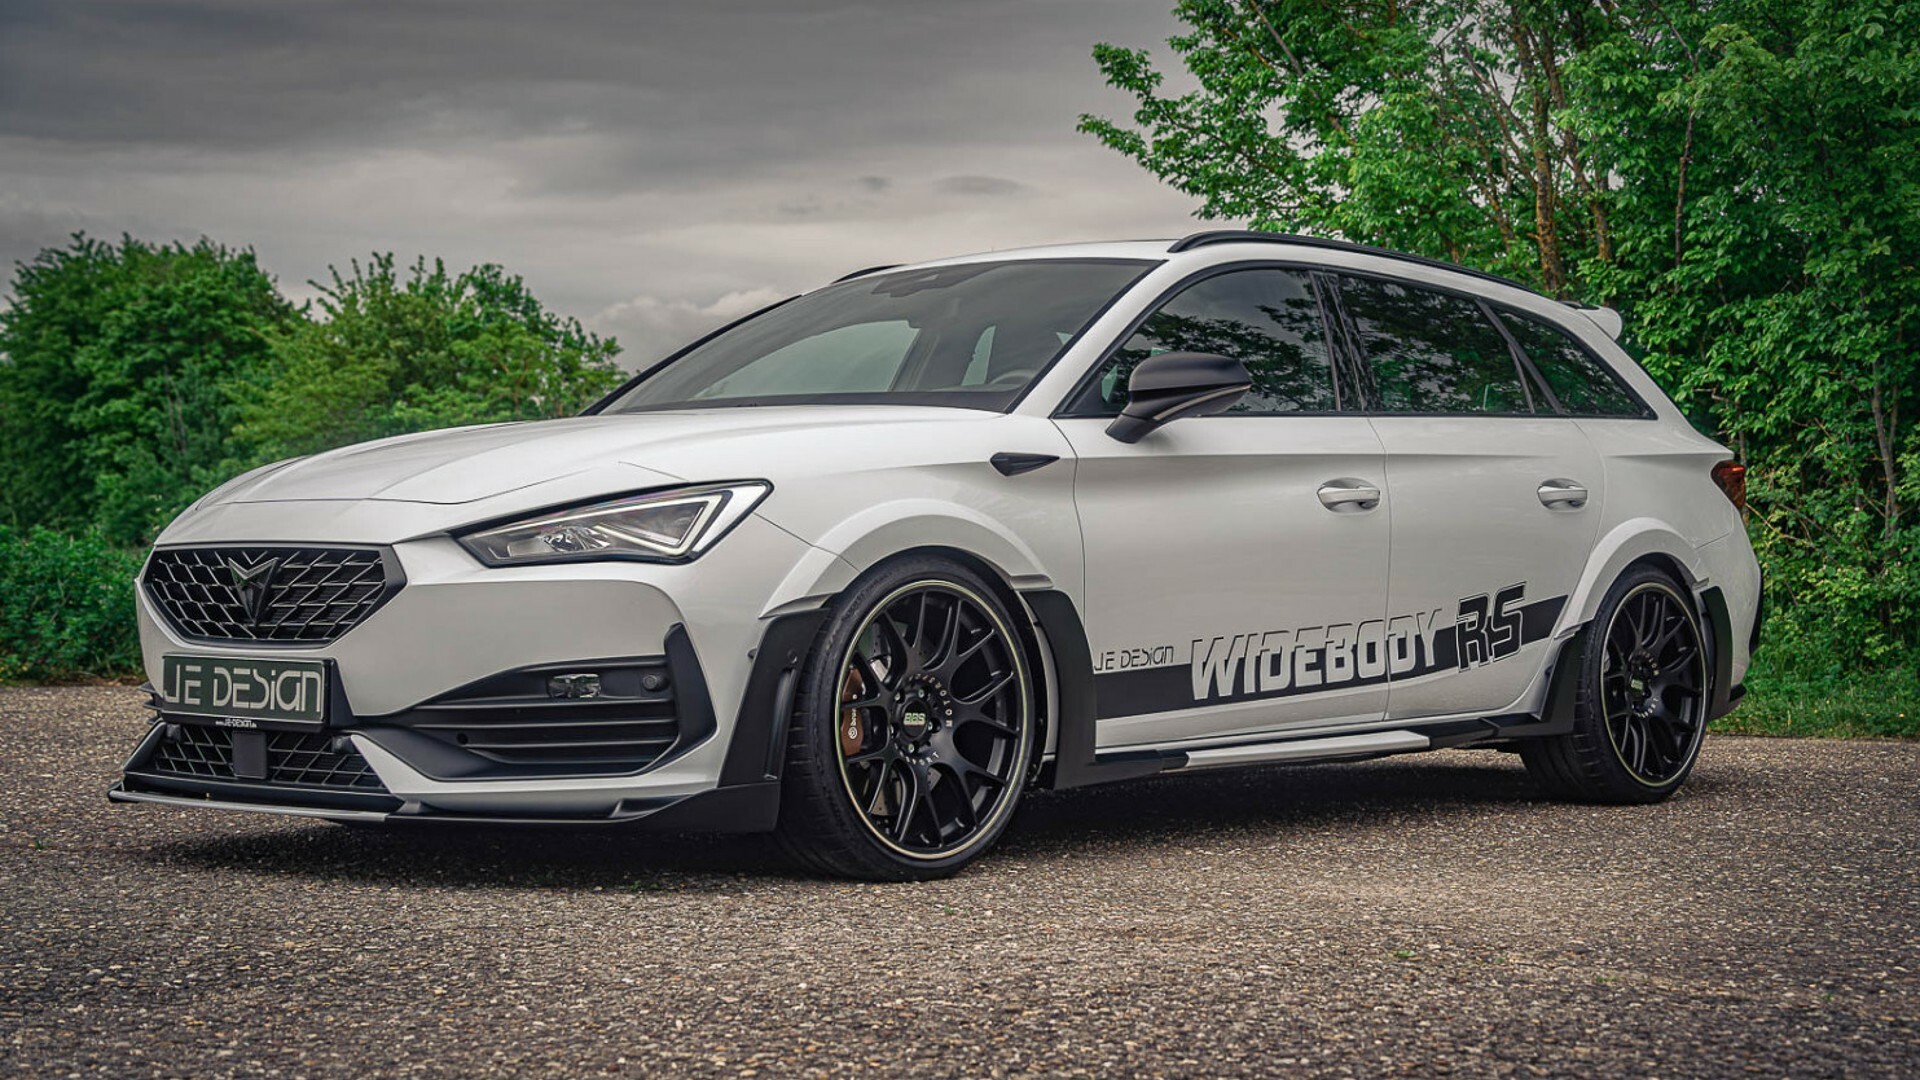 Cupra Leon Sports Tourer Spiced Up From JE Design With Wide